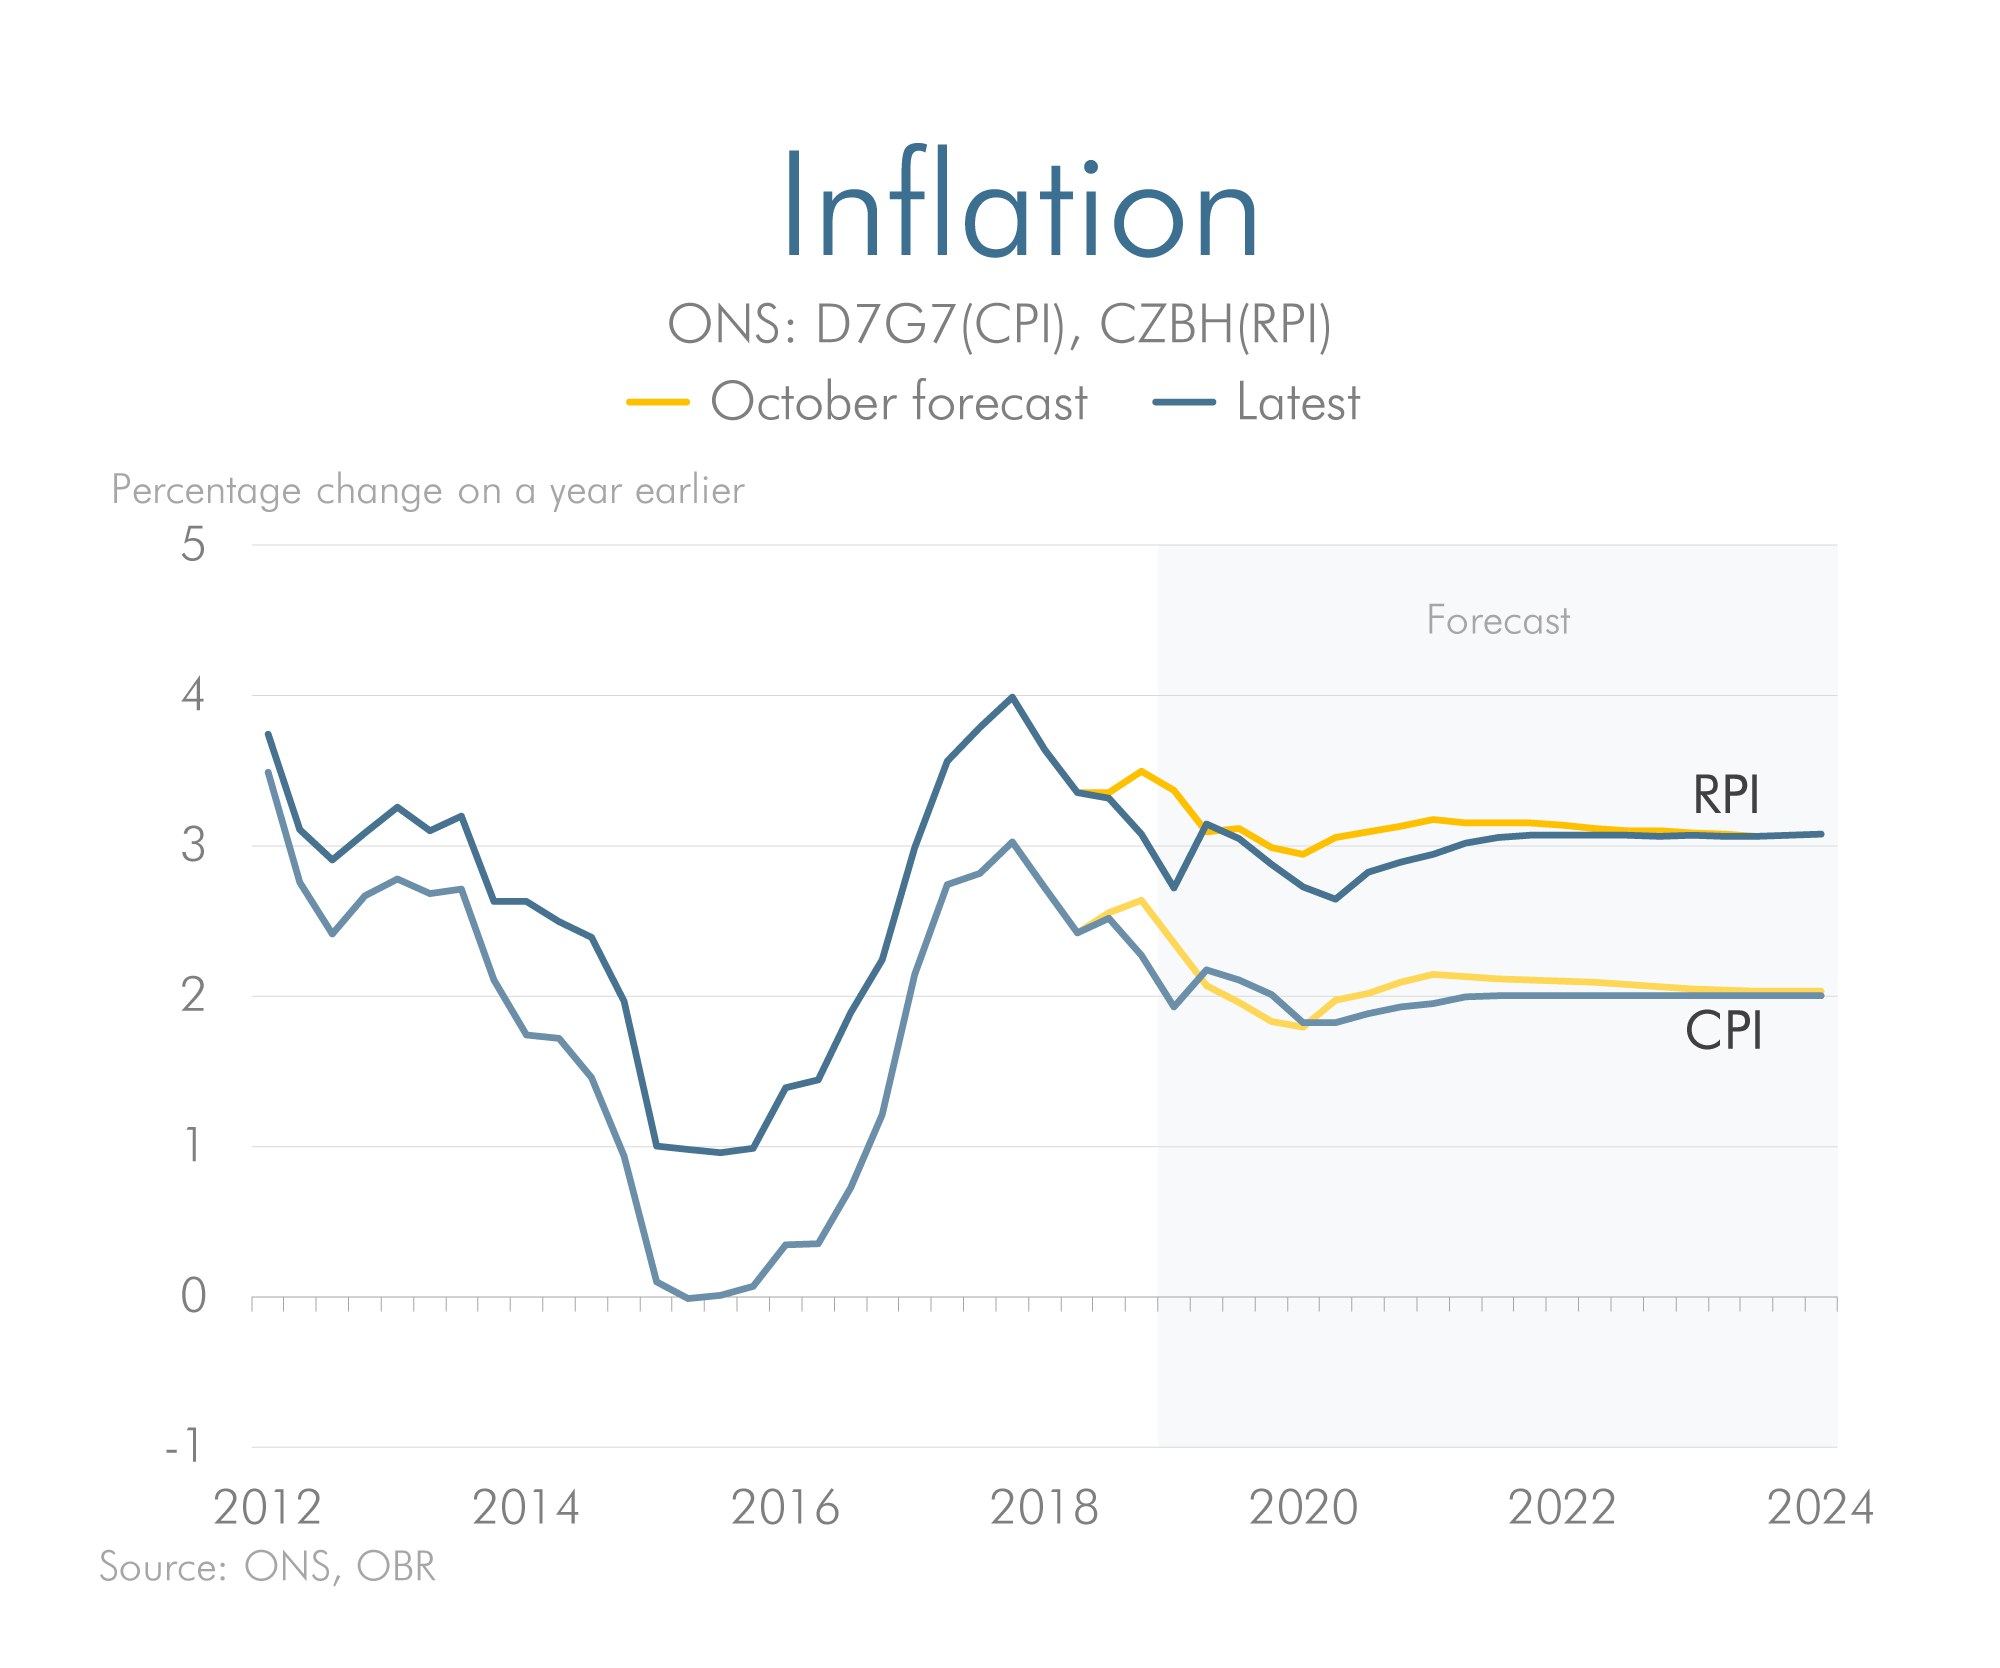 Latest forecast versus previous forecast for inflation